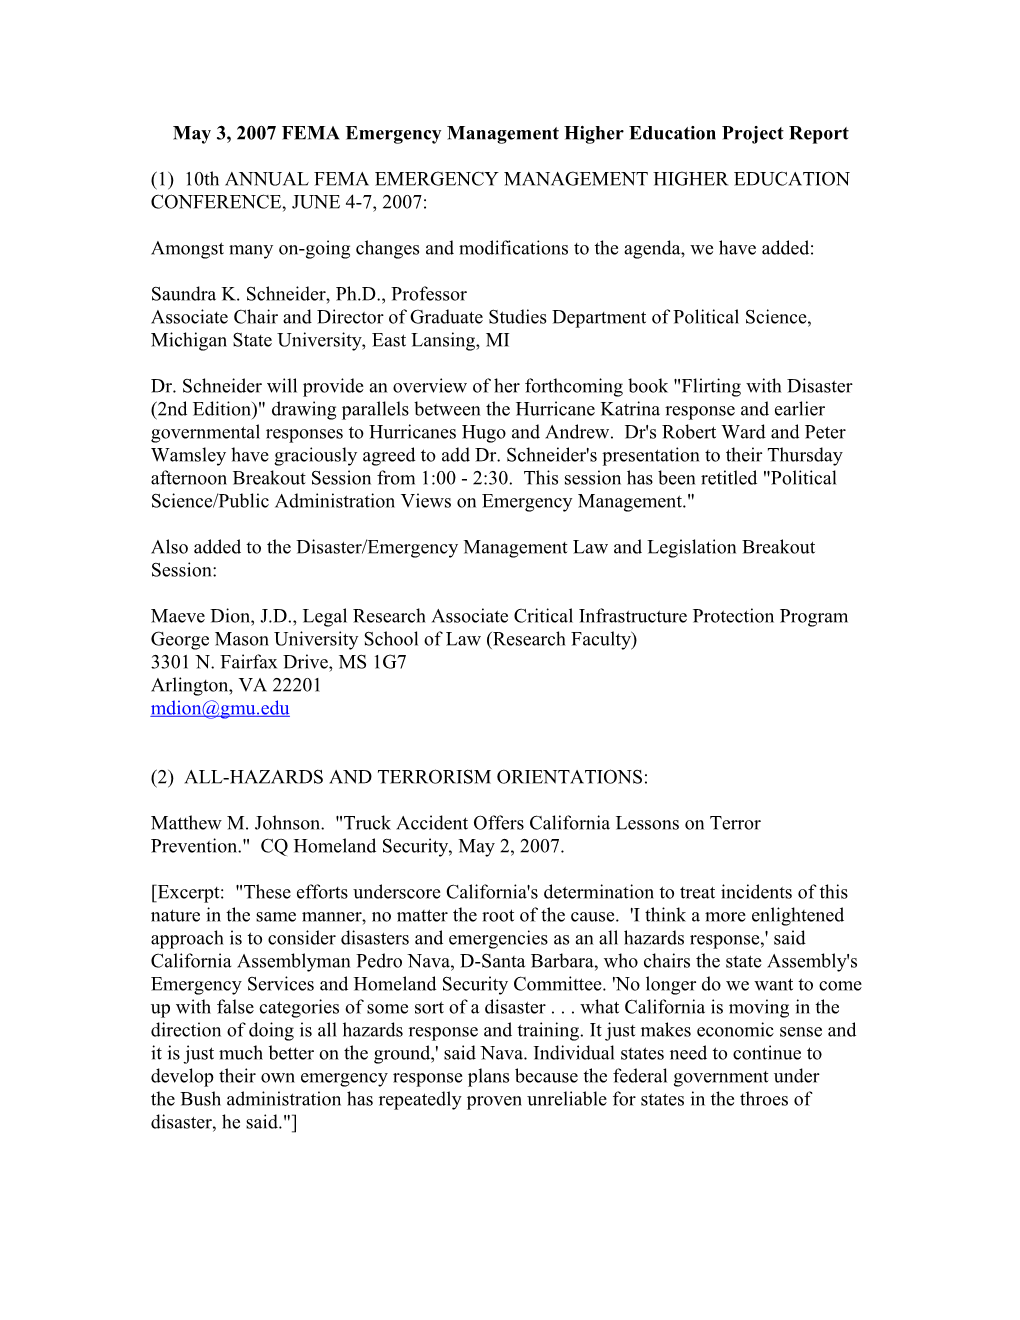 May 3, 2007 FEMA Emergency Management Higher Education Project Report